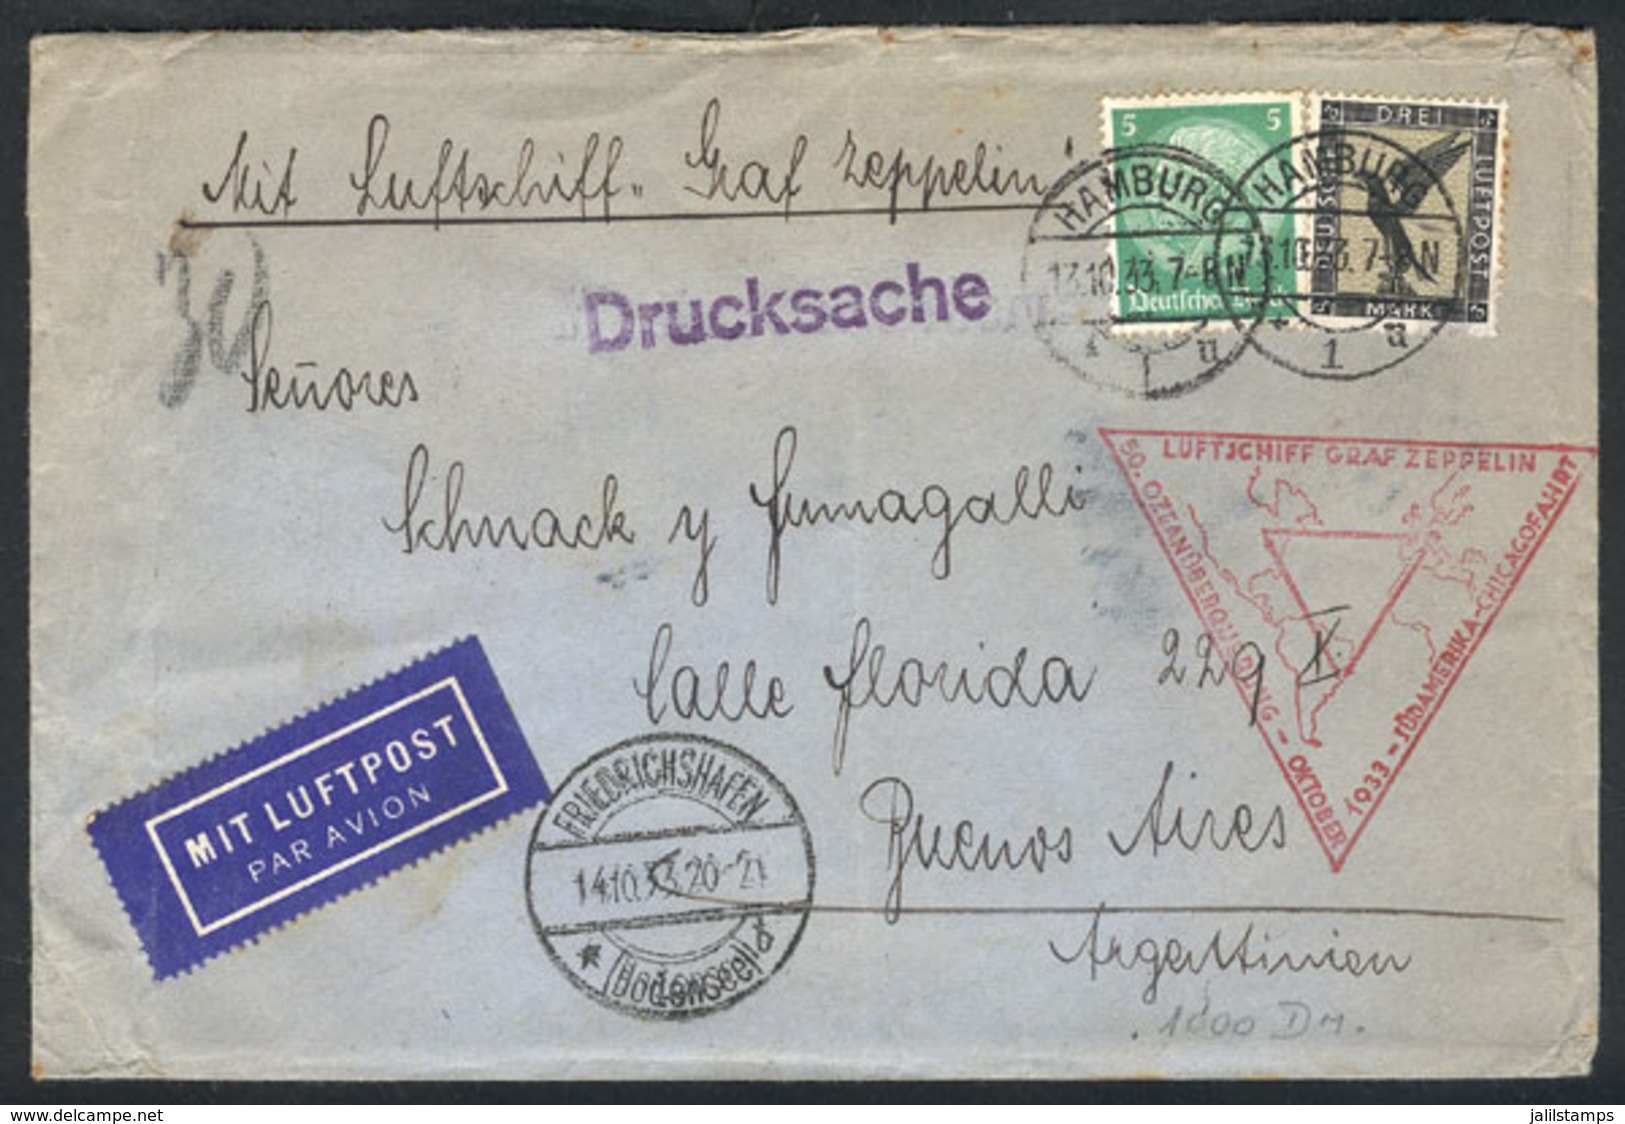 GERMANY: 13/OC/1933 Hamburg - Buenos Aires: Cover With PRINTED MATTER Flown By Zeppelin, Franked With 3.05Mk., With Tria - Precursores